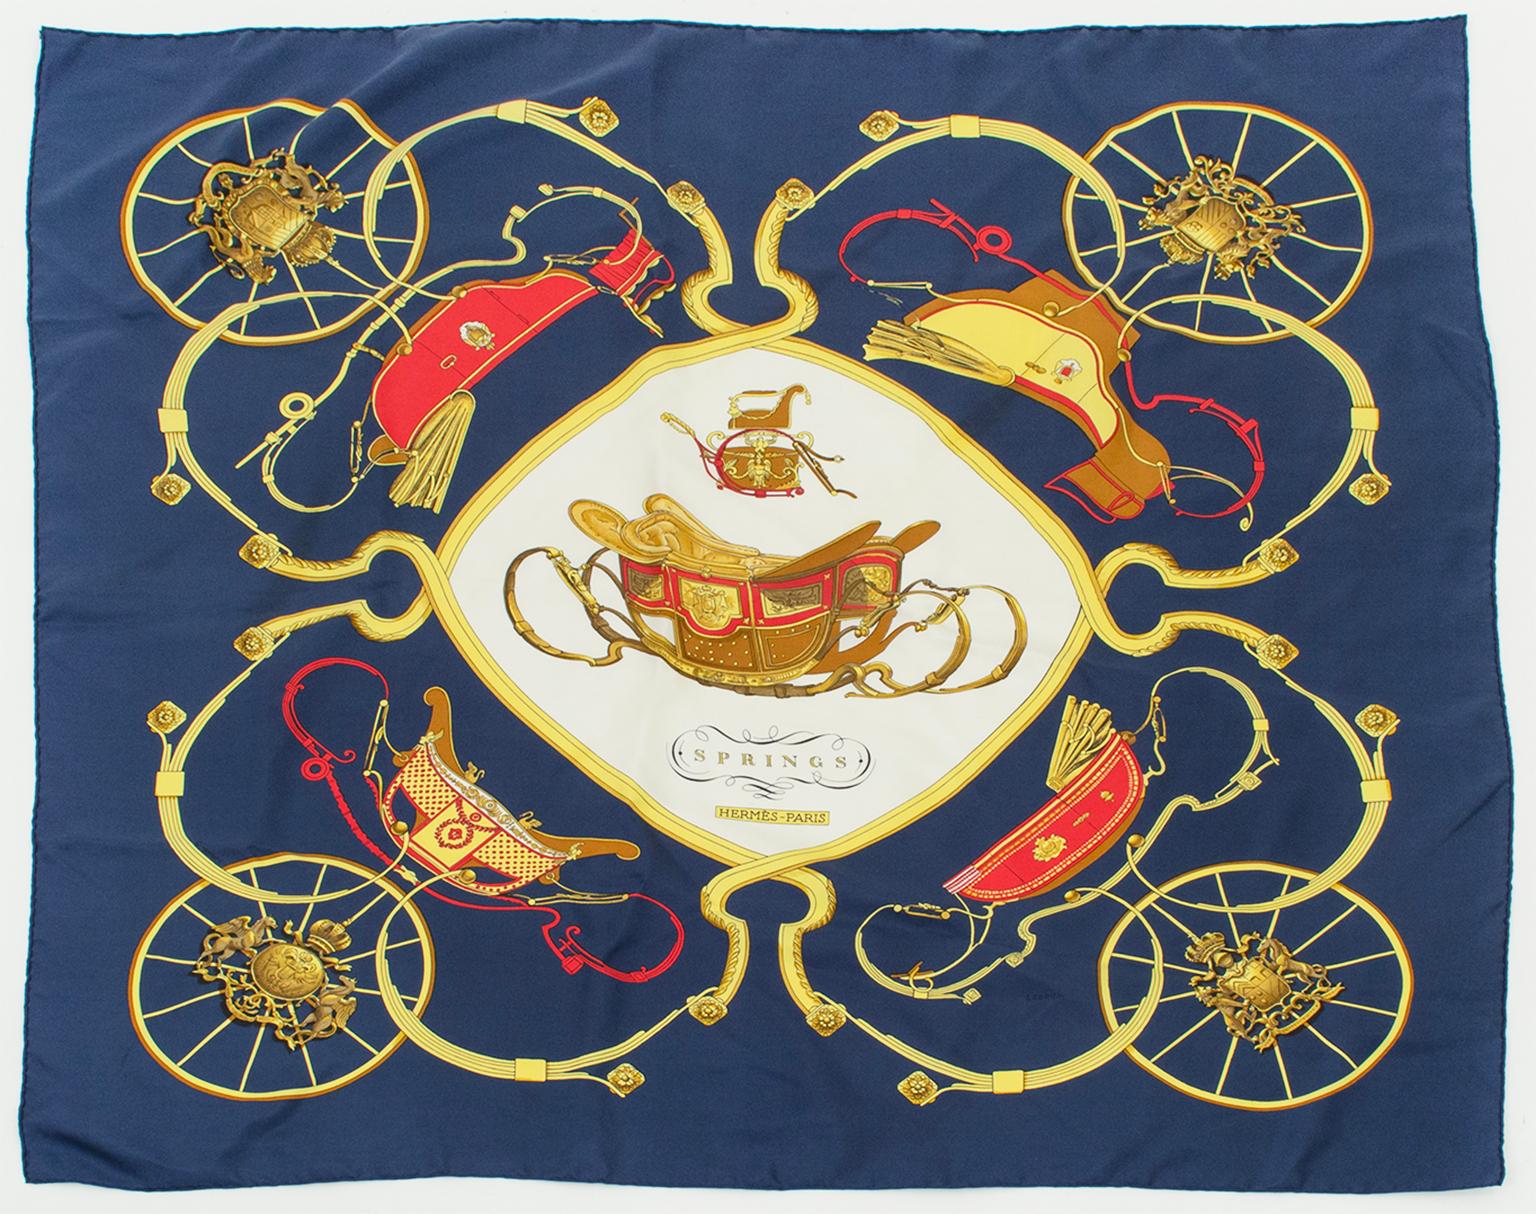 A fitting observation of the Queen’s passing, Philippe Ledoux’s Springs scarf features an array of gold royal carriages, wheels and crests against a navy ground. Created when the Queen was only 48, exactly halfway through her illustrious